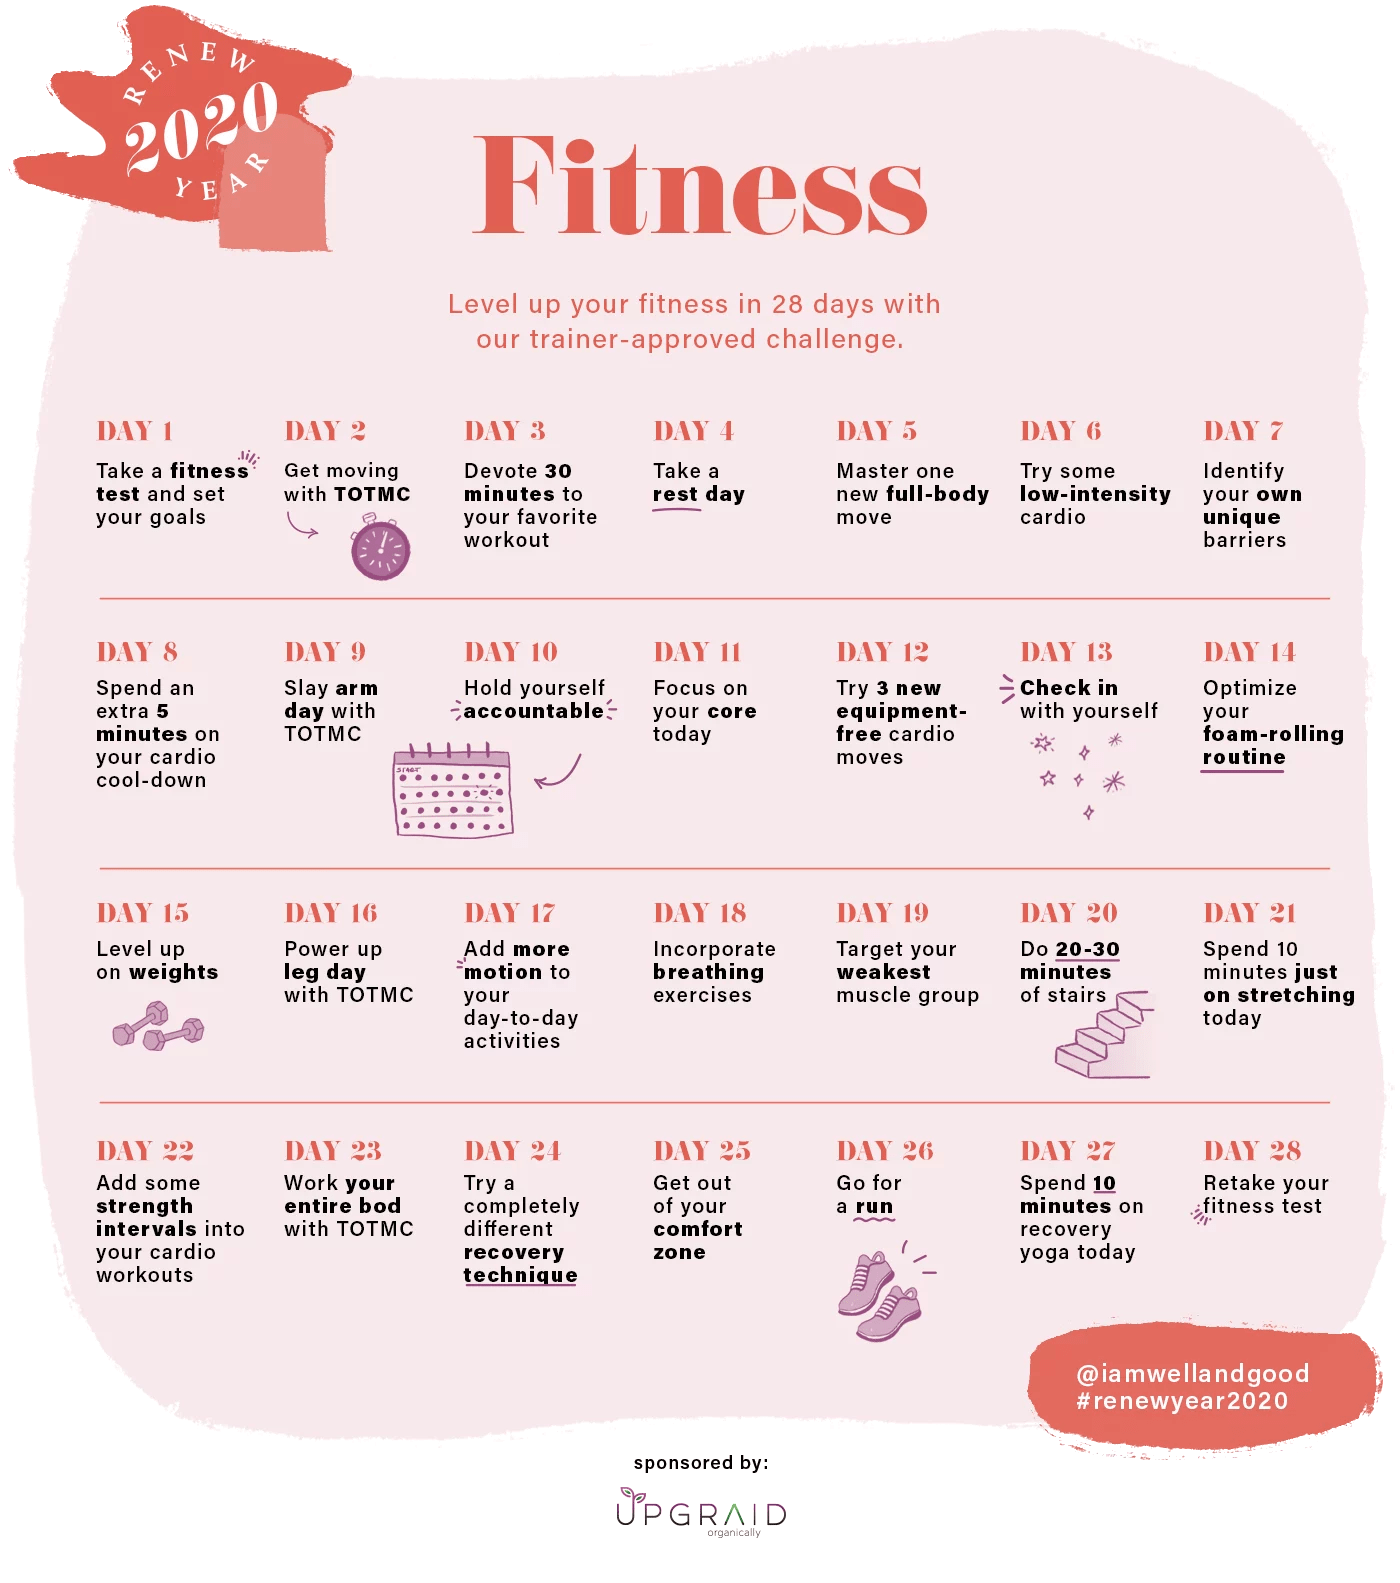 Fitness Challenges and Goals